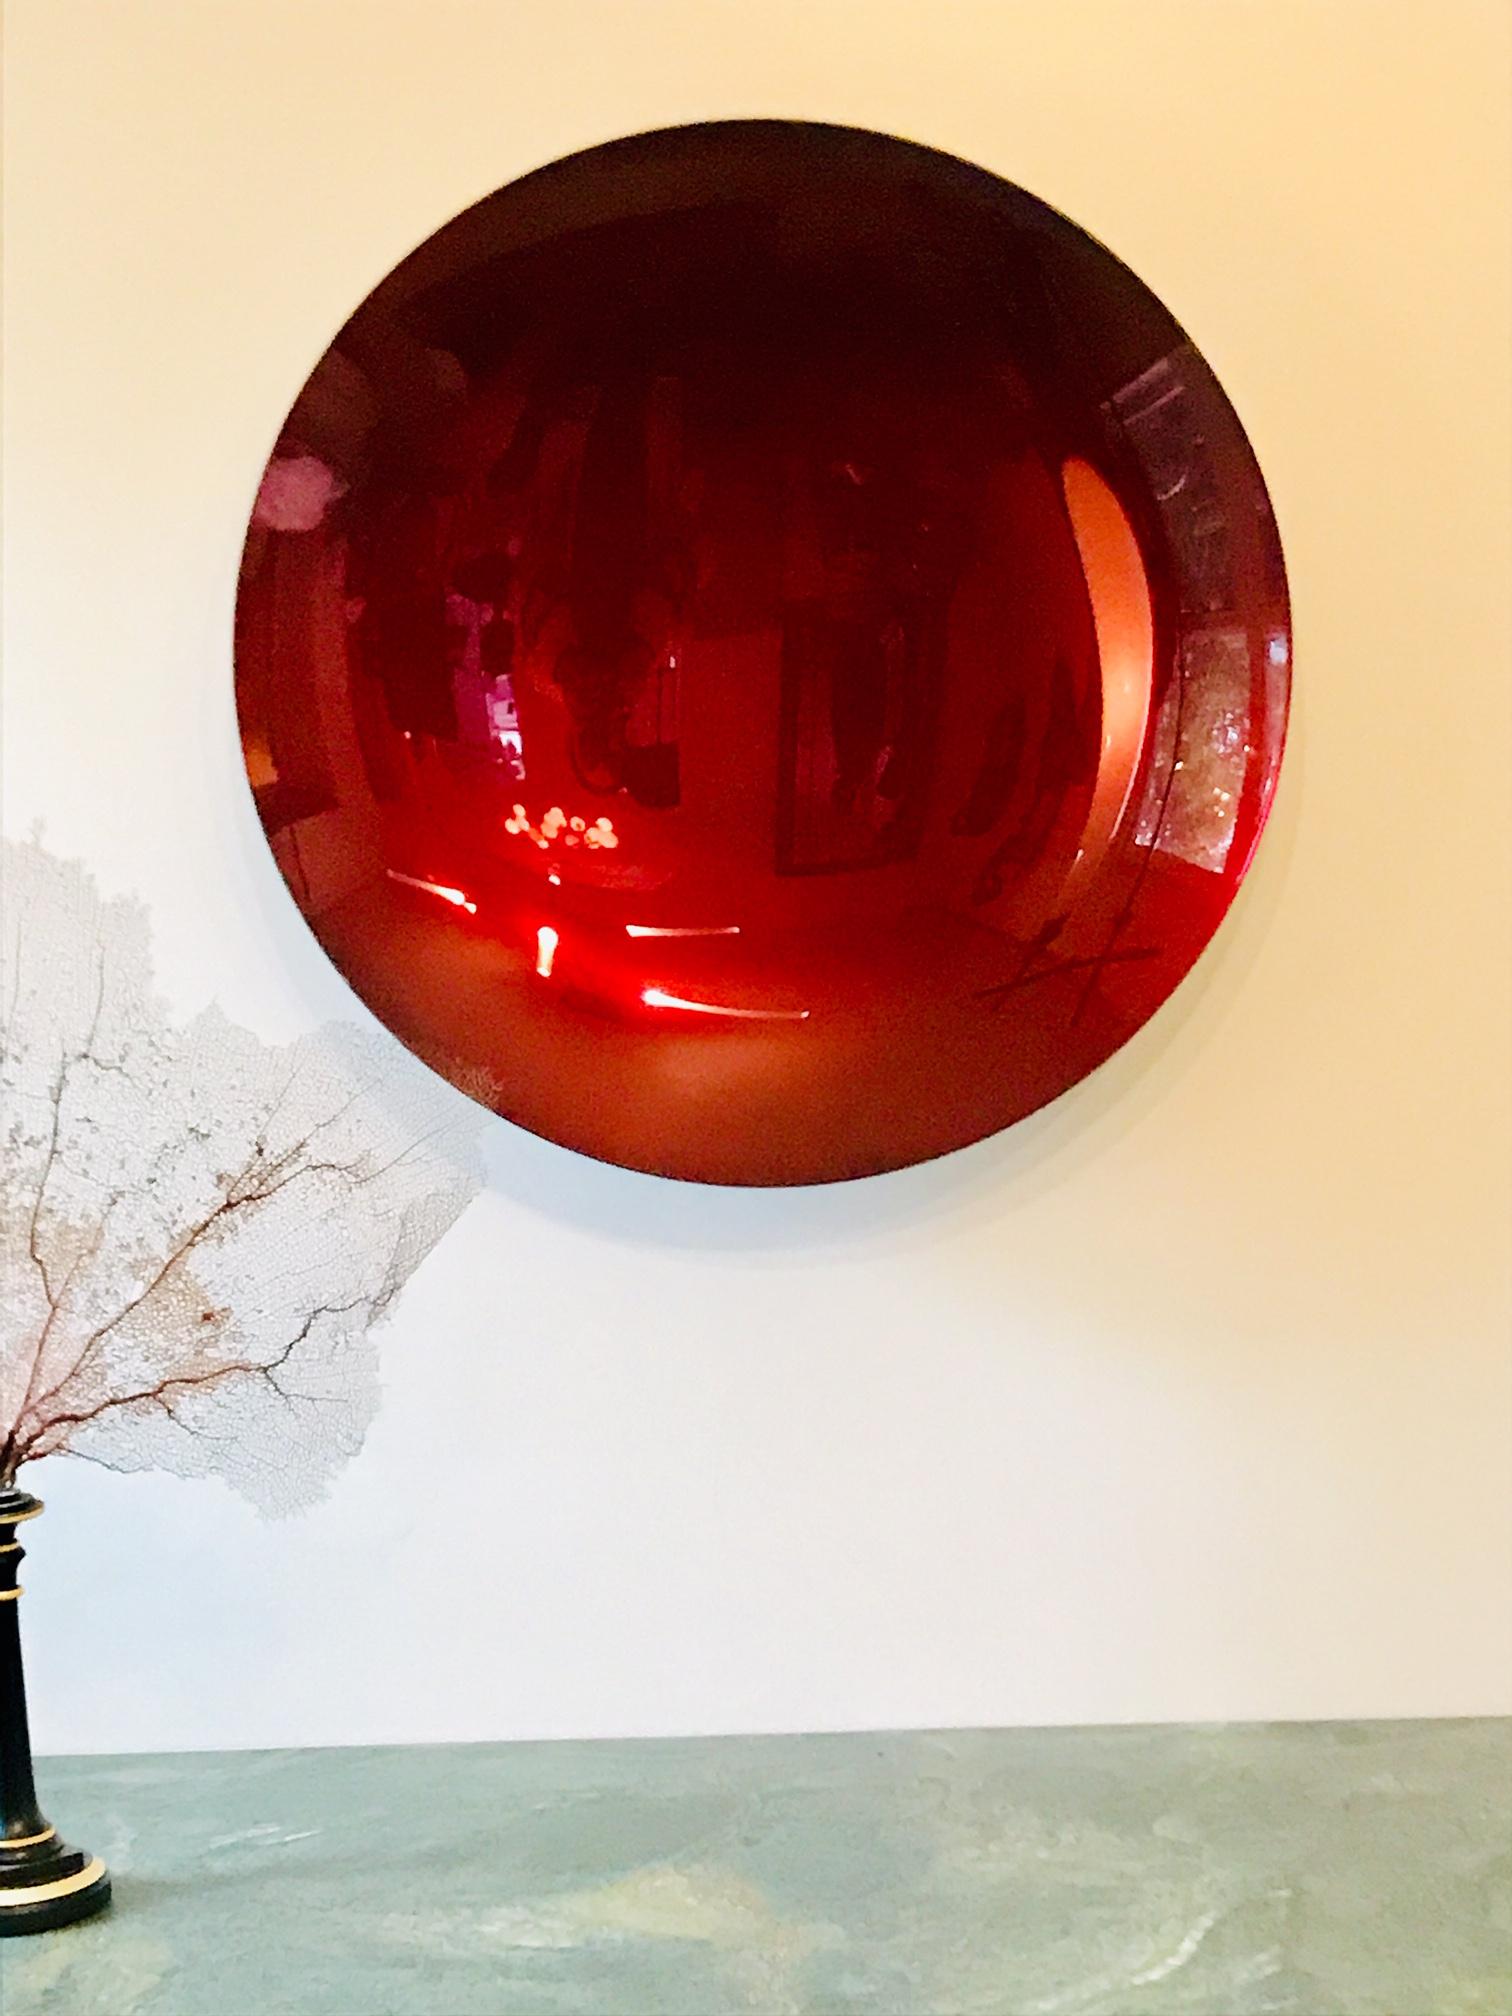 Reflective Glass Art Sculpture by Galasee for Bourgeois Boheme 2